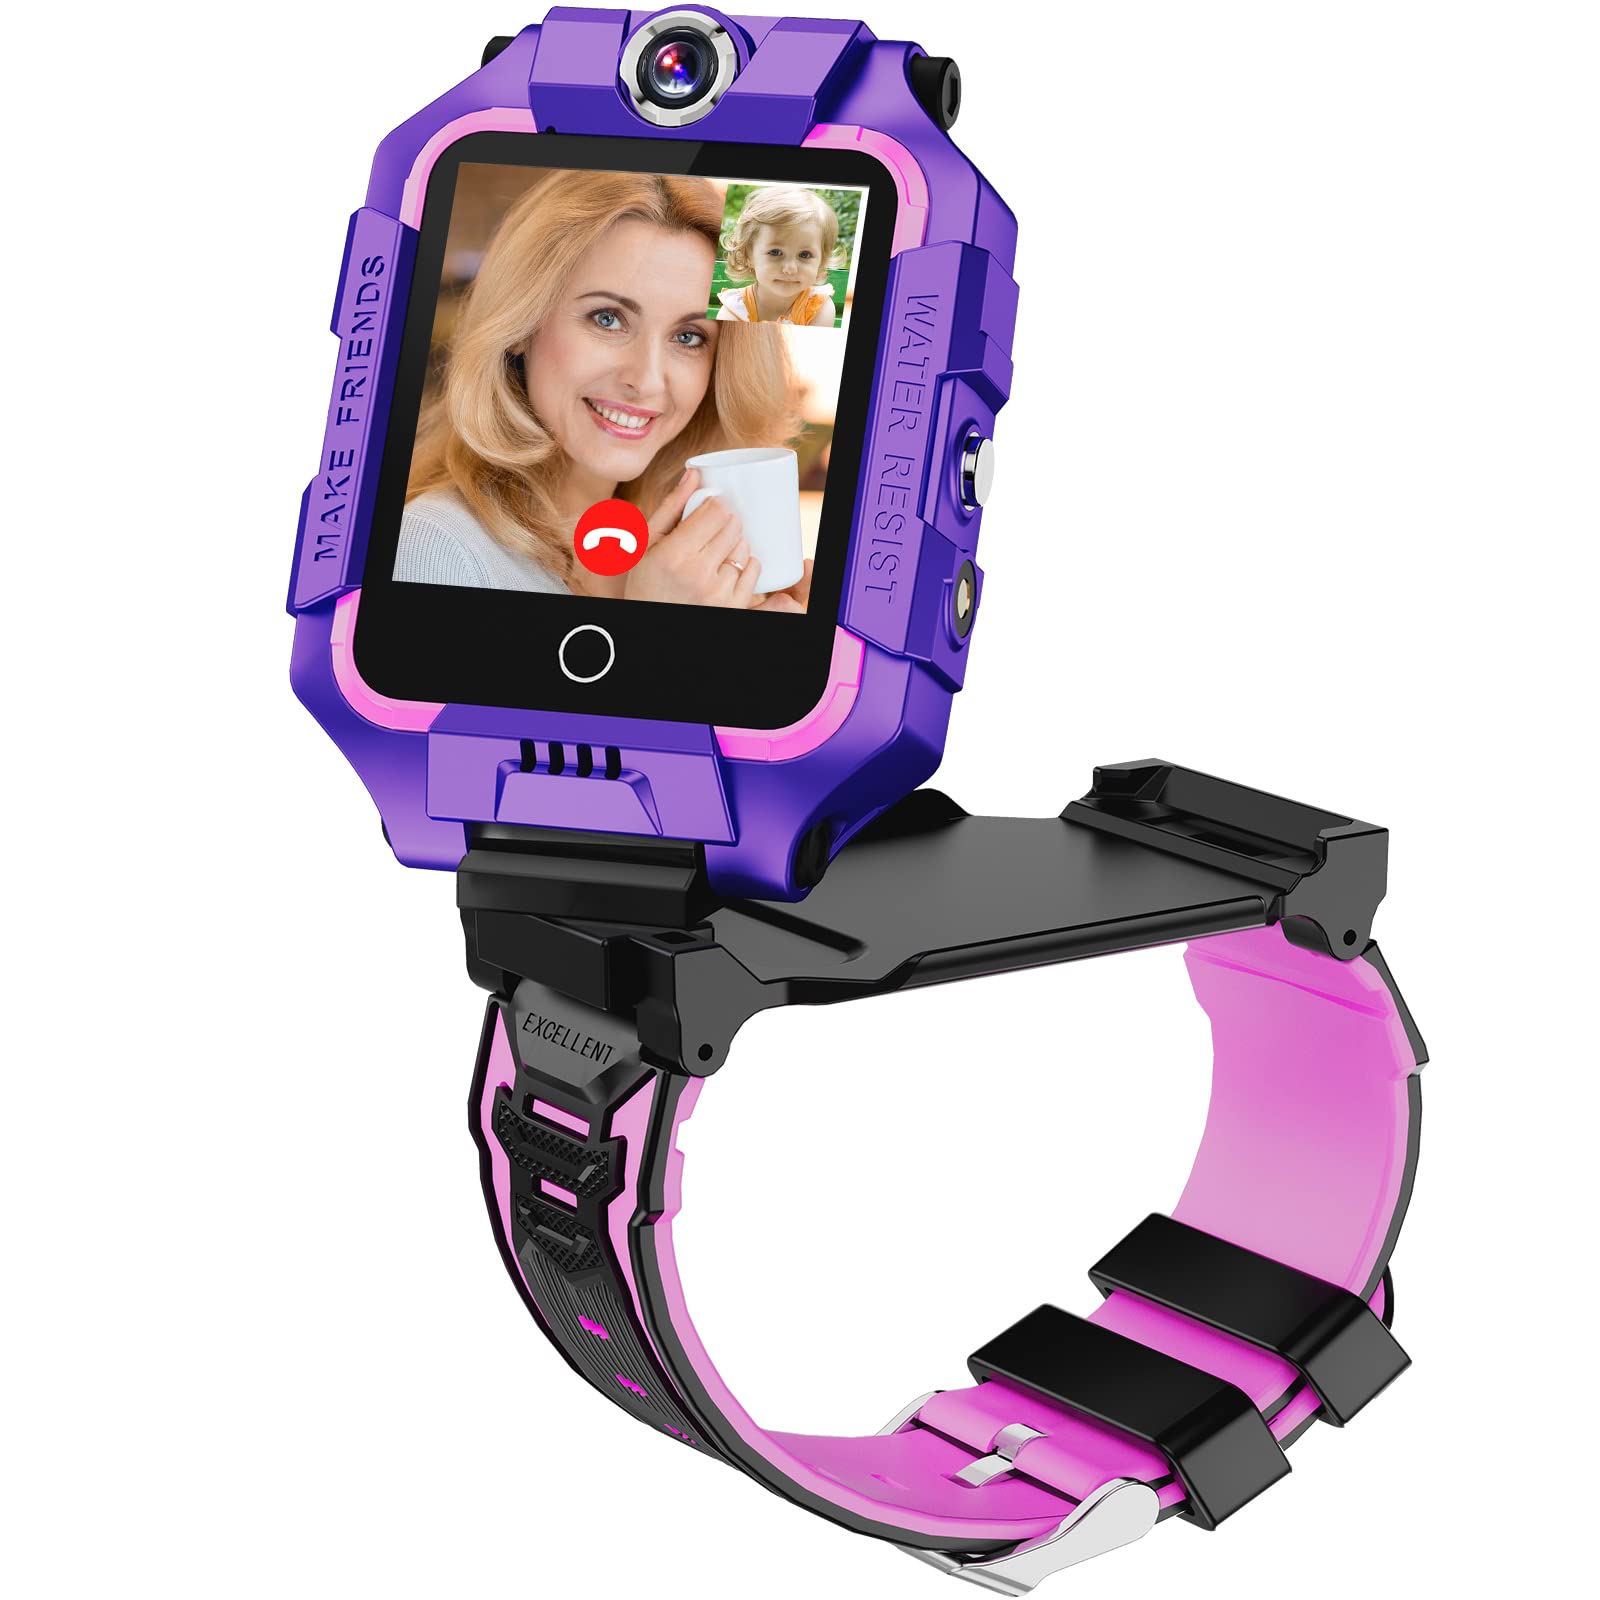 4G Kids Smart Watch for Boys Girls, Watch Phone Voice Messages Video Call Waterproof 360° Rotating WiFi Smartwatch for Children Students Ages 3-14 ...